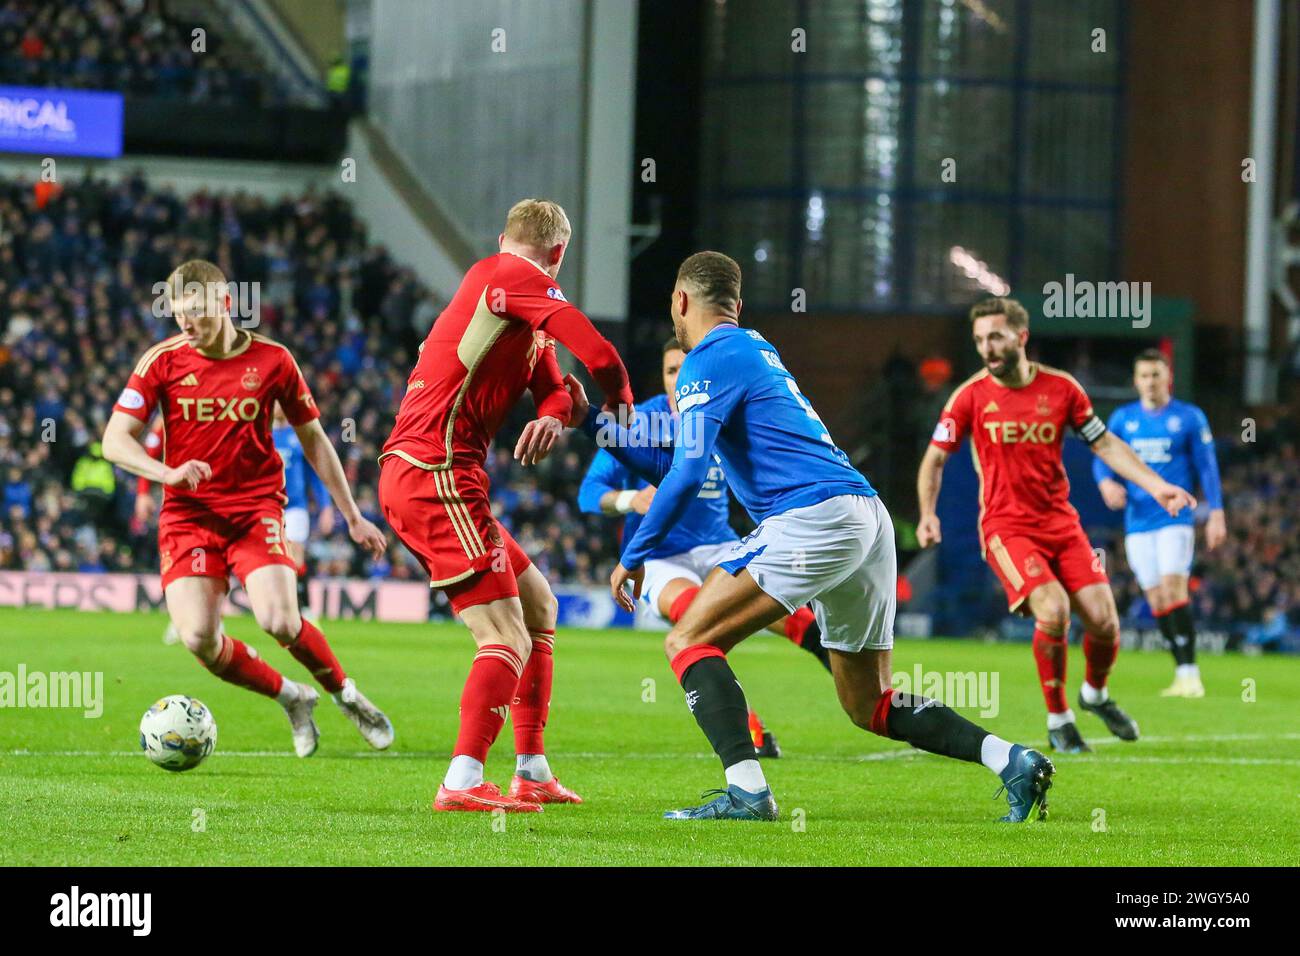 Glasgow, UK. 06th Feb, 2024. Rangers play against Aberdeen at Ibrox Stadium, in a Scottish Premiership game. Rangers are now only 3 points behind Celtic in the league, so the result for Rangers is important. Aberdeen appointed NEIL WARNOCK as interim manager and this will be his first game. Credit: Findlay/Alamy Live News Stock Photo